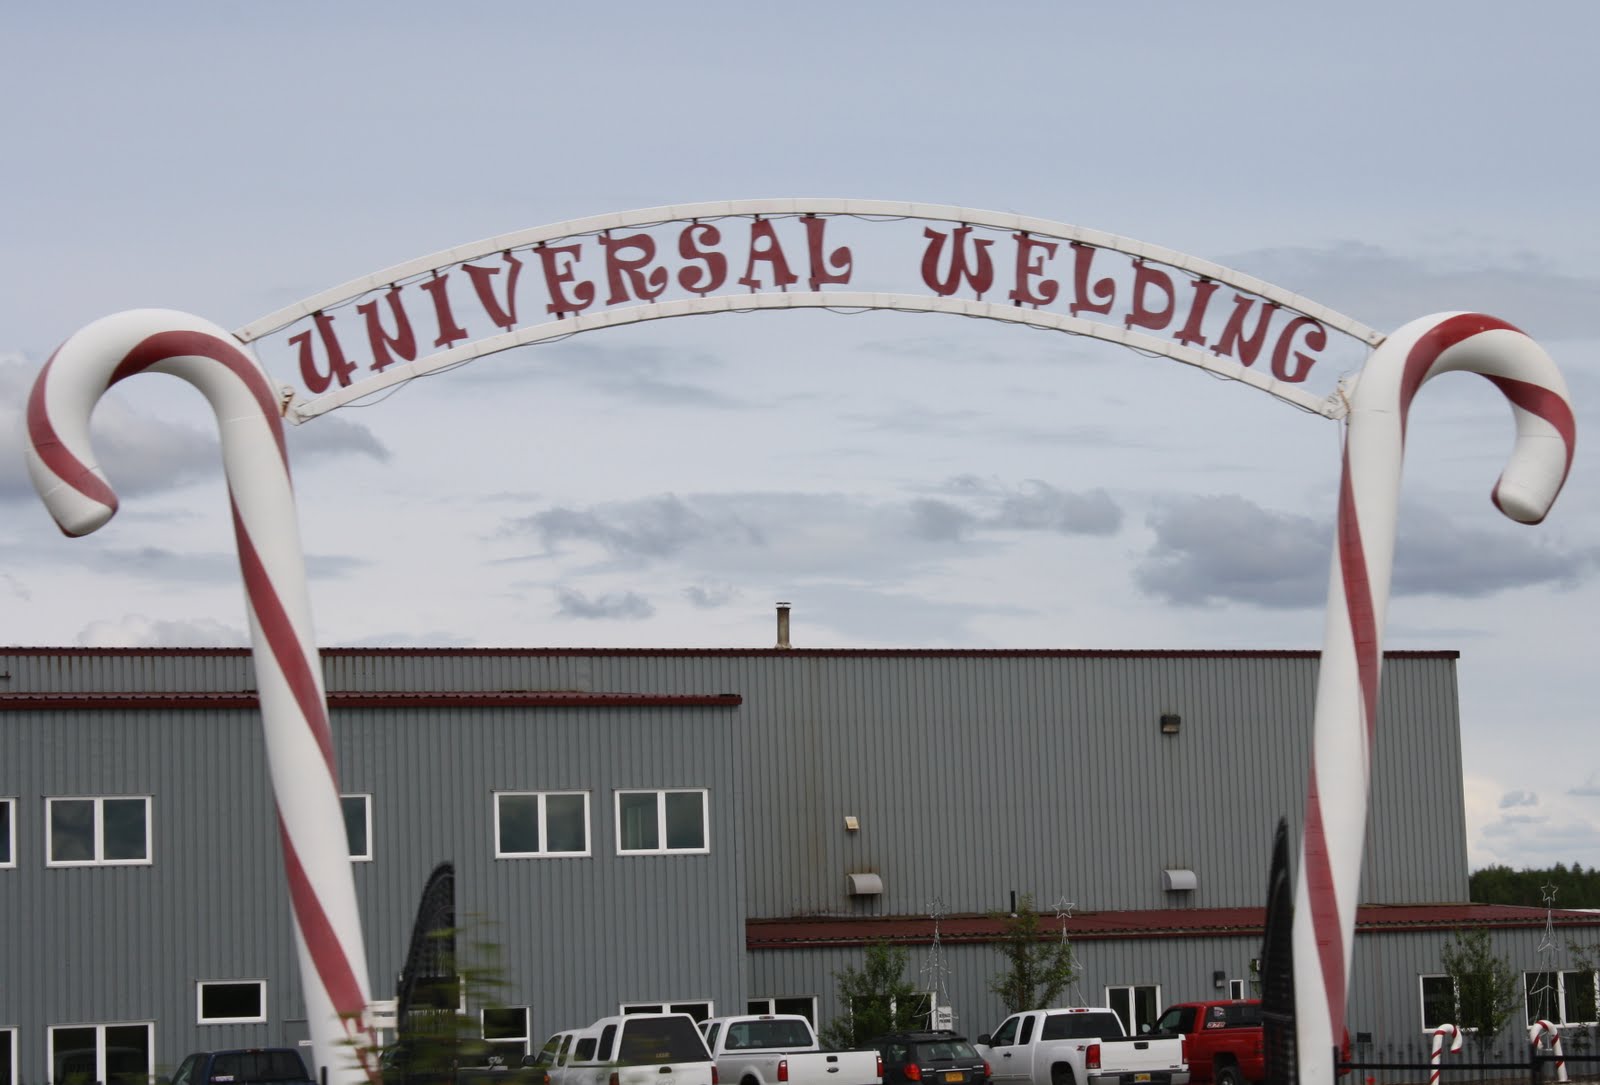 Tour of Universal Welding’s Coal Fired Boiler Project Monday, March 17th and Wednesday, March 19th